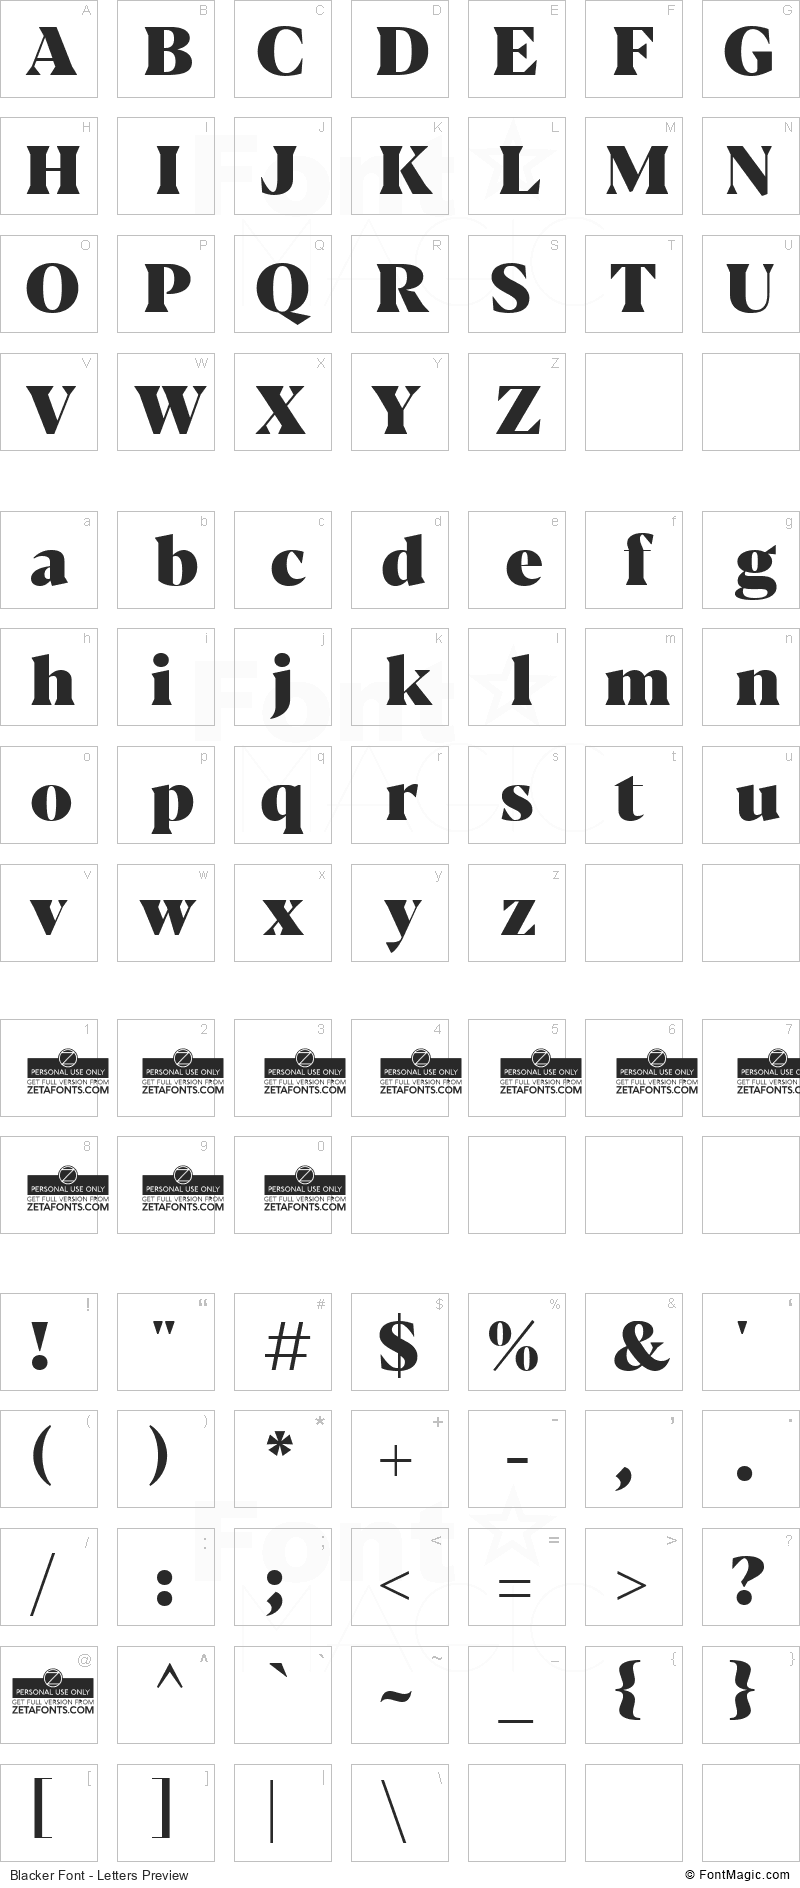 Blacker Font - All Latters Preview Chart